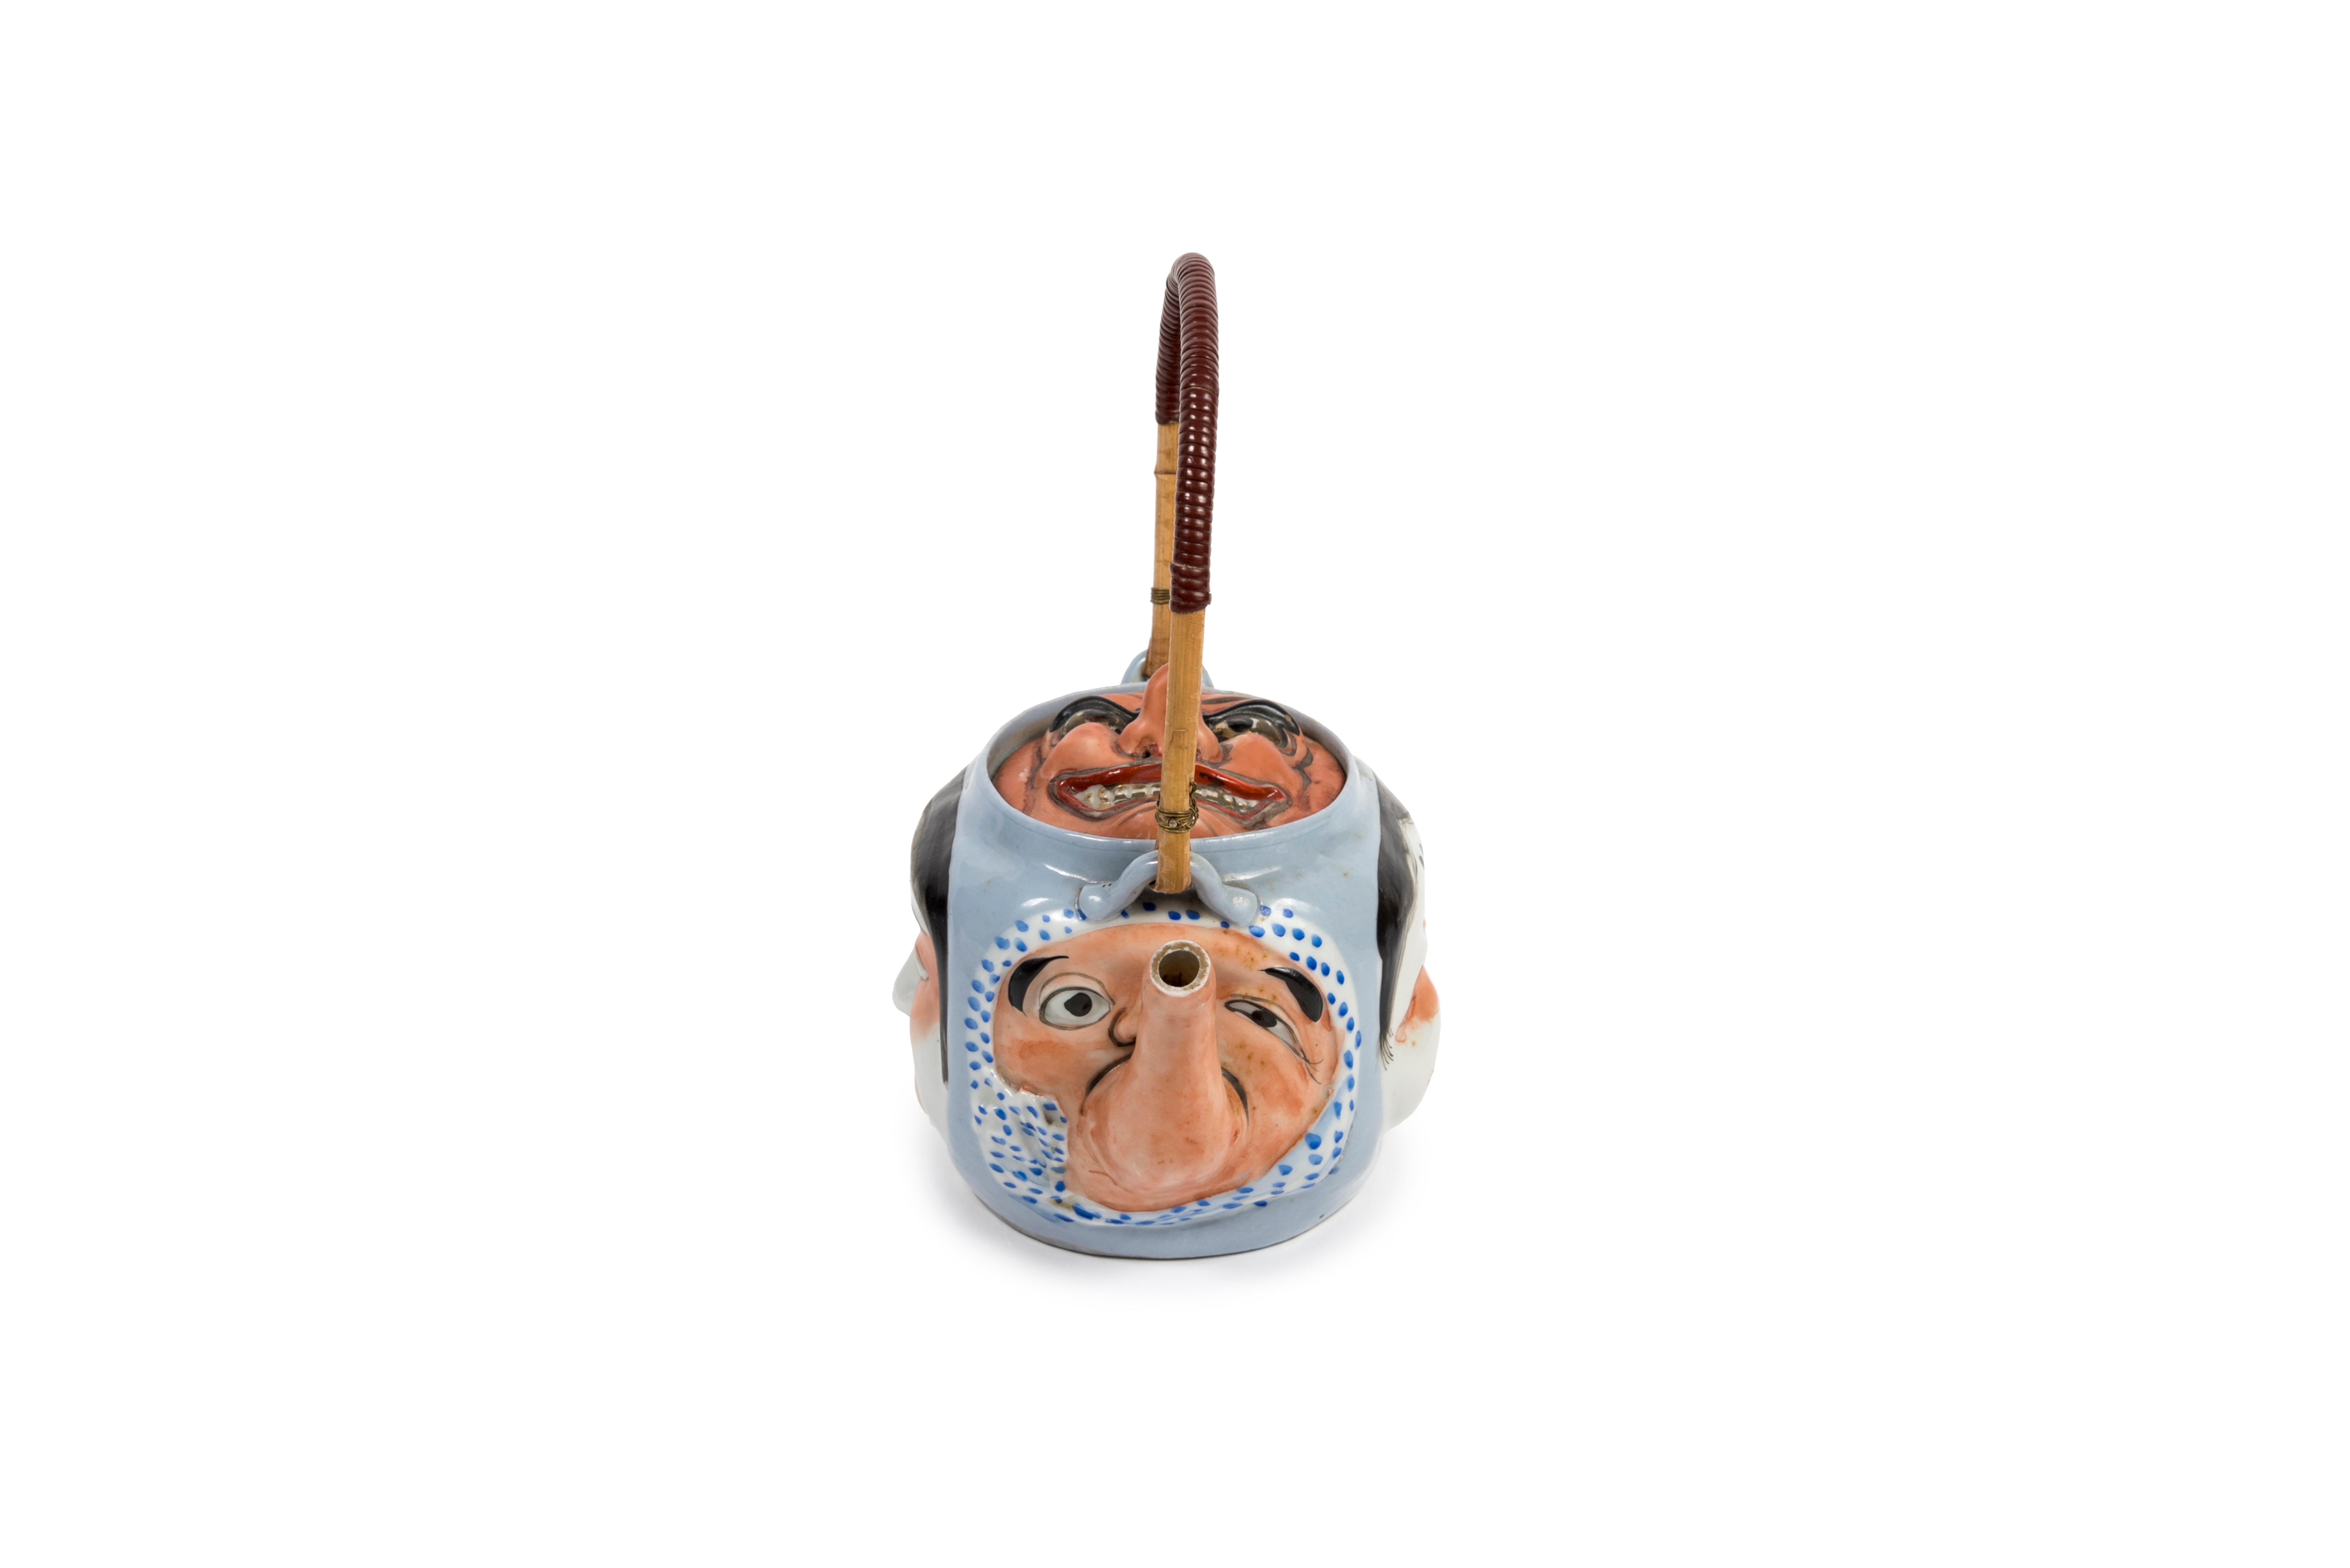 Banko polychrome enamelled terracotta teapot, representing on each side masks from the Japanese folklore. Handle in wickerwork.

On the spout, Hyottoko, a comical and childlike character. He is recognizable by the shape of his elongated mouth with